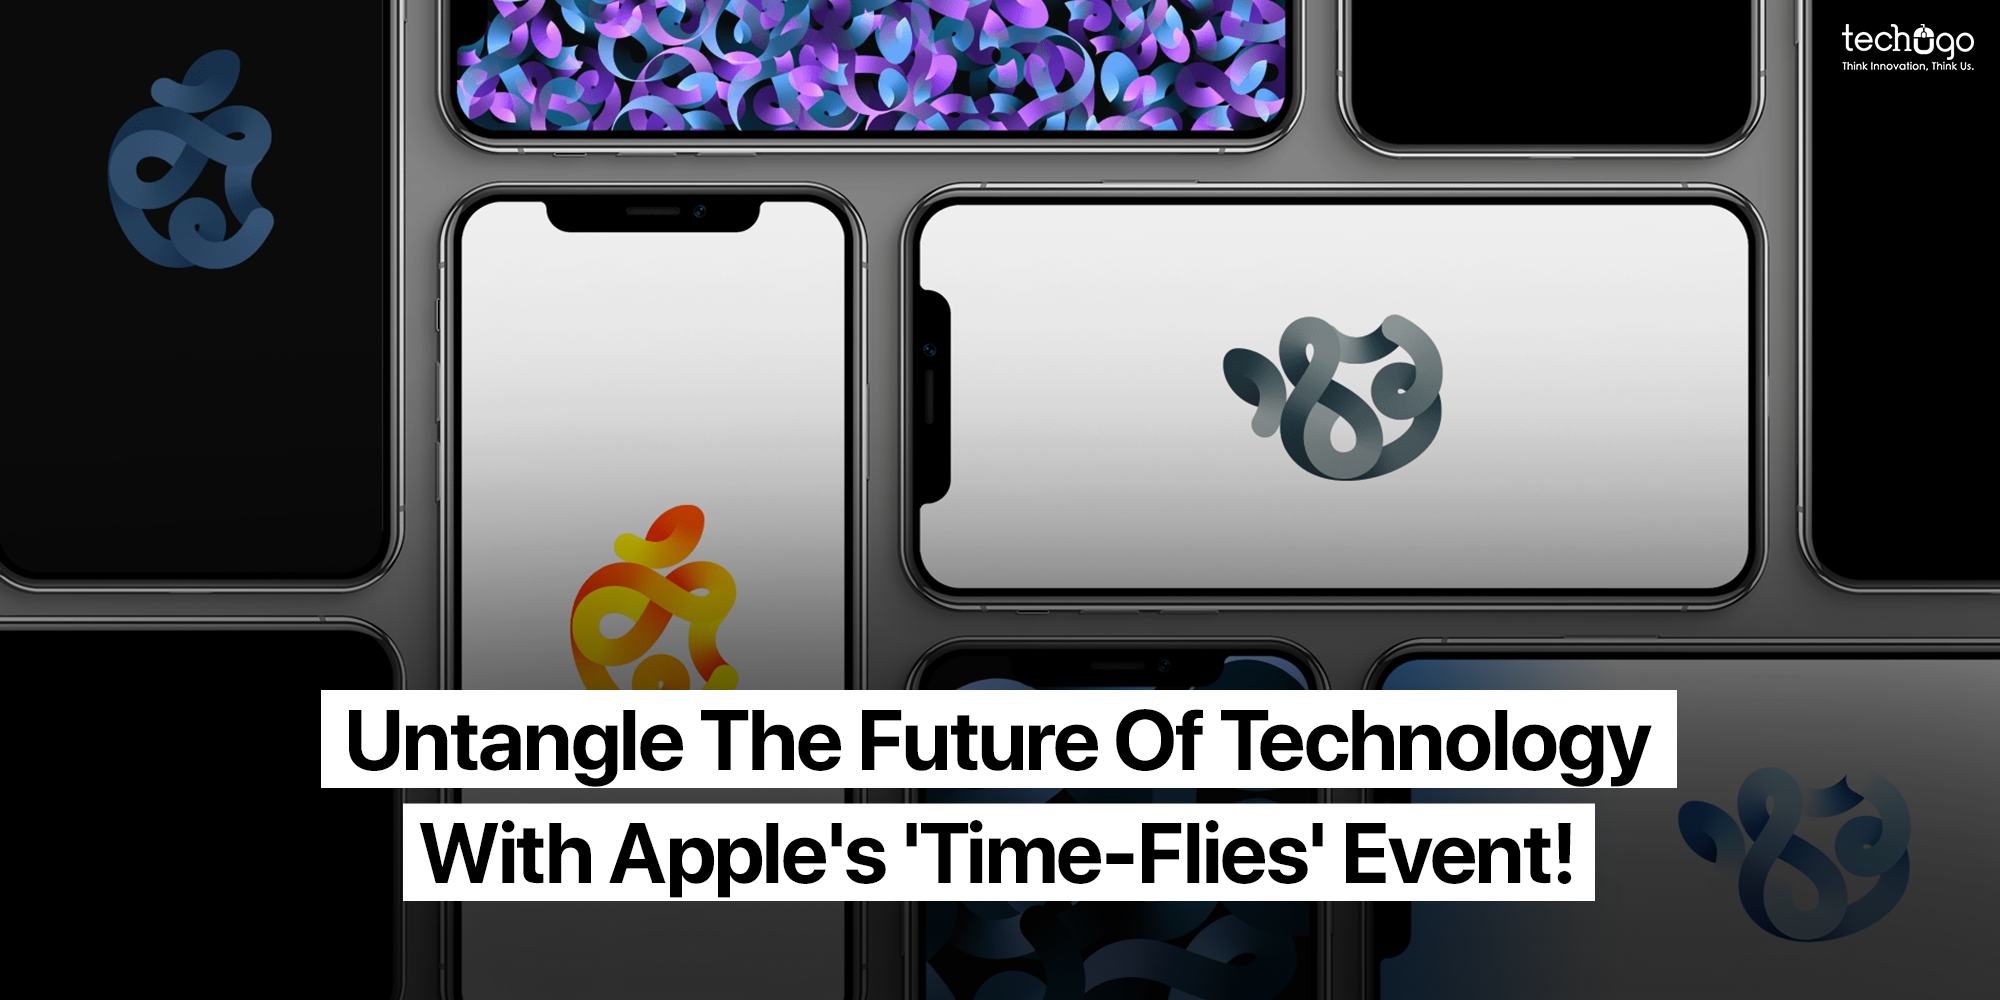 Untangle The Future Of Technology With Apple’s ‘Time-Flies’ Event!